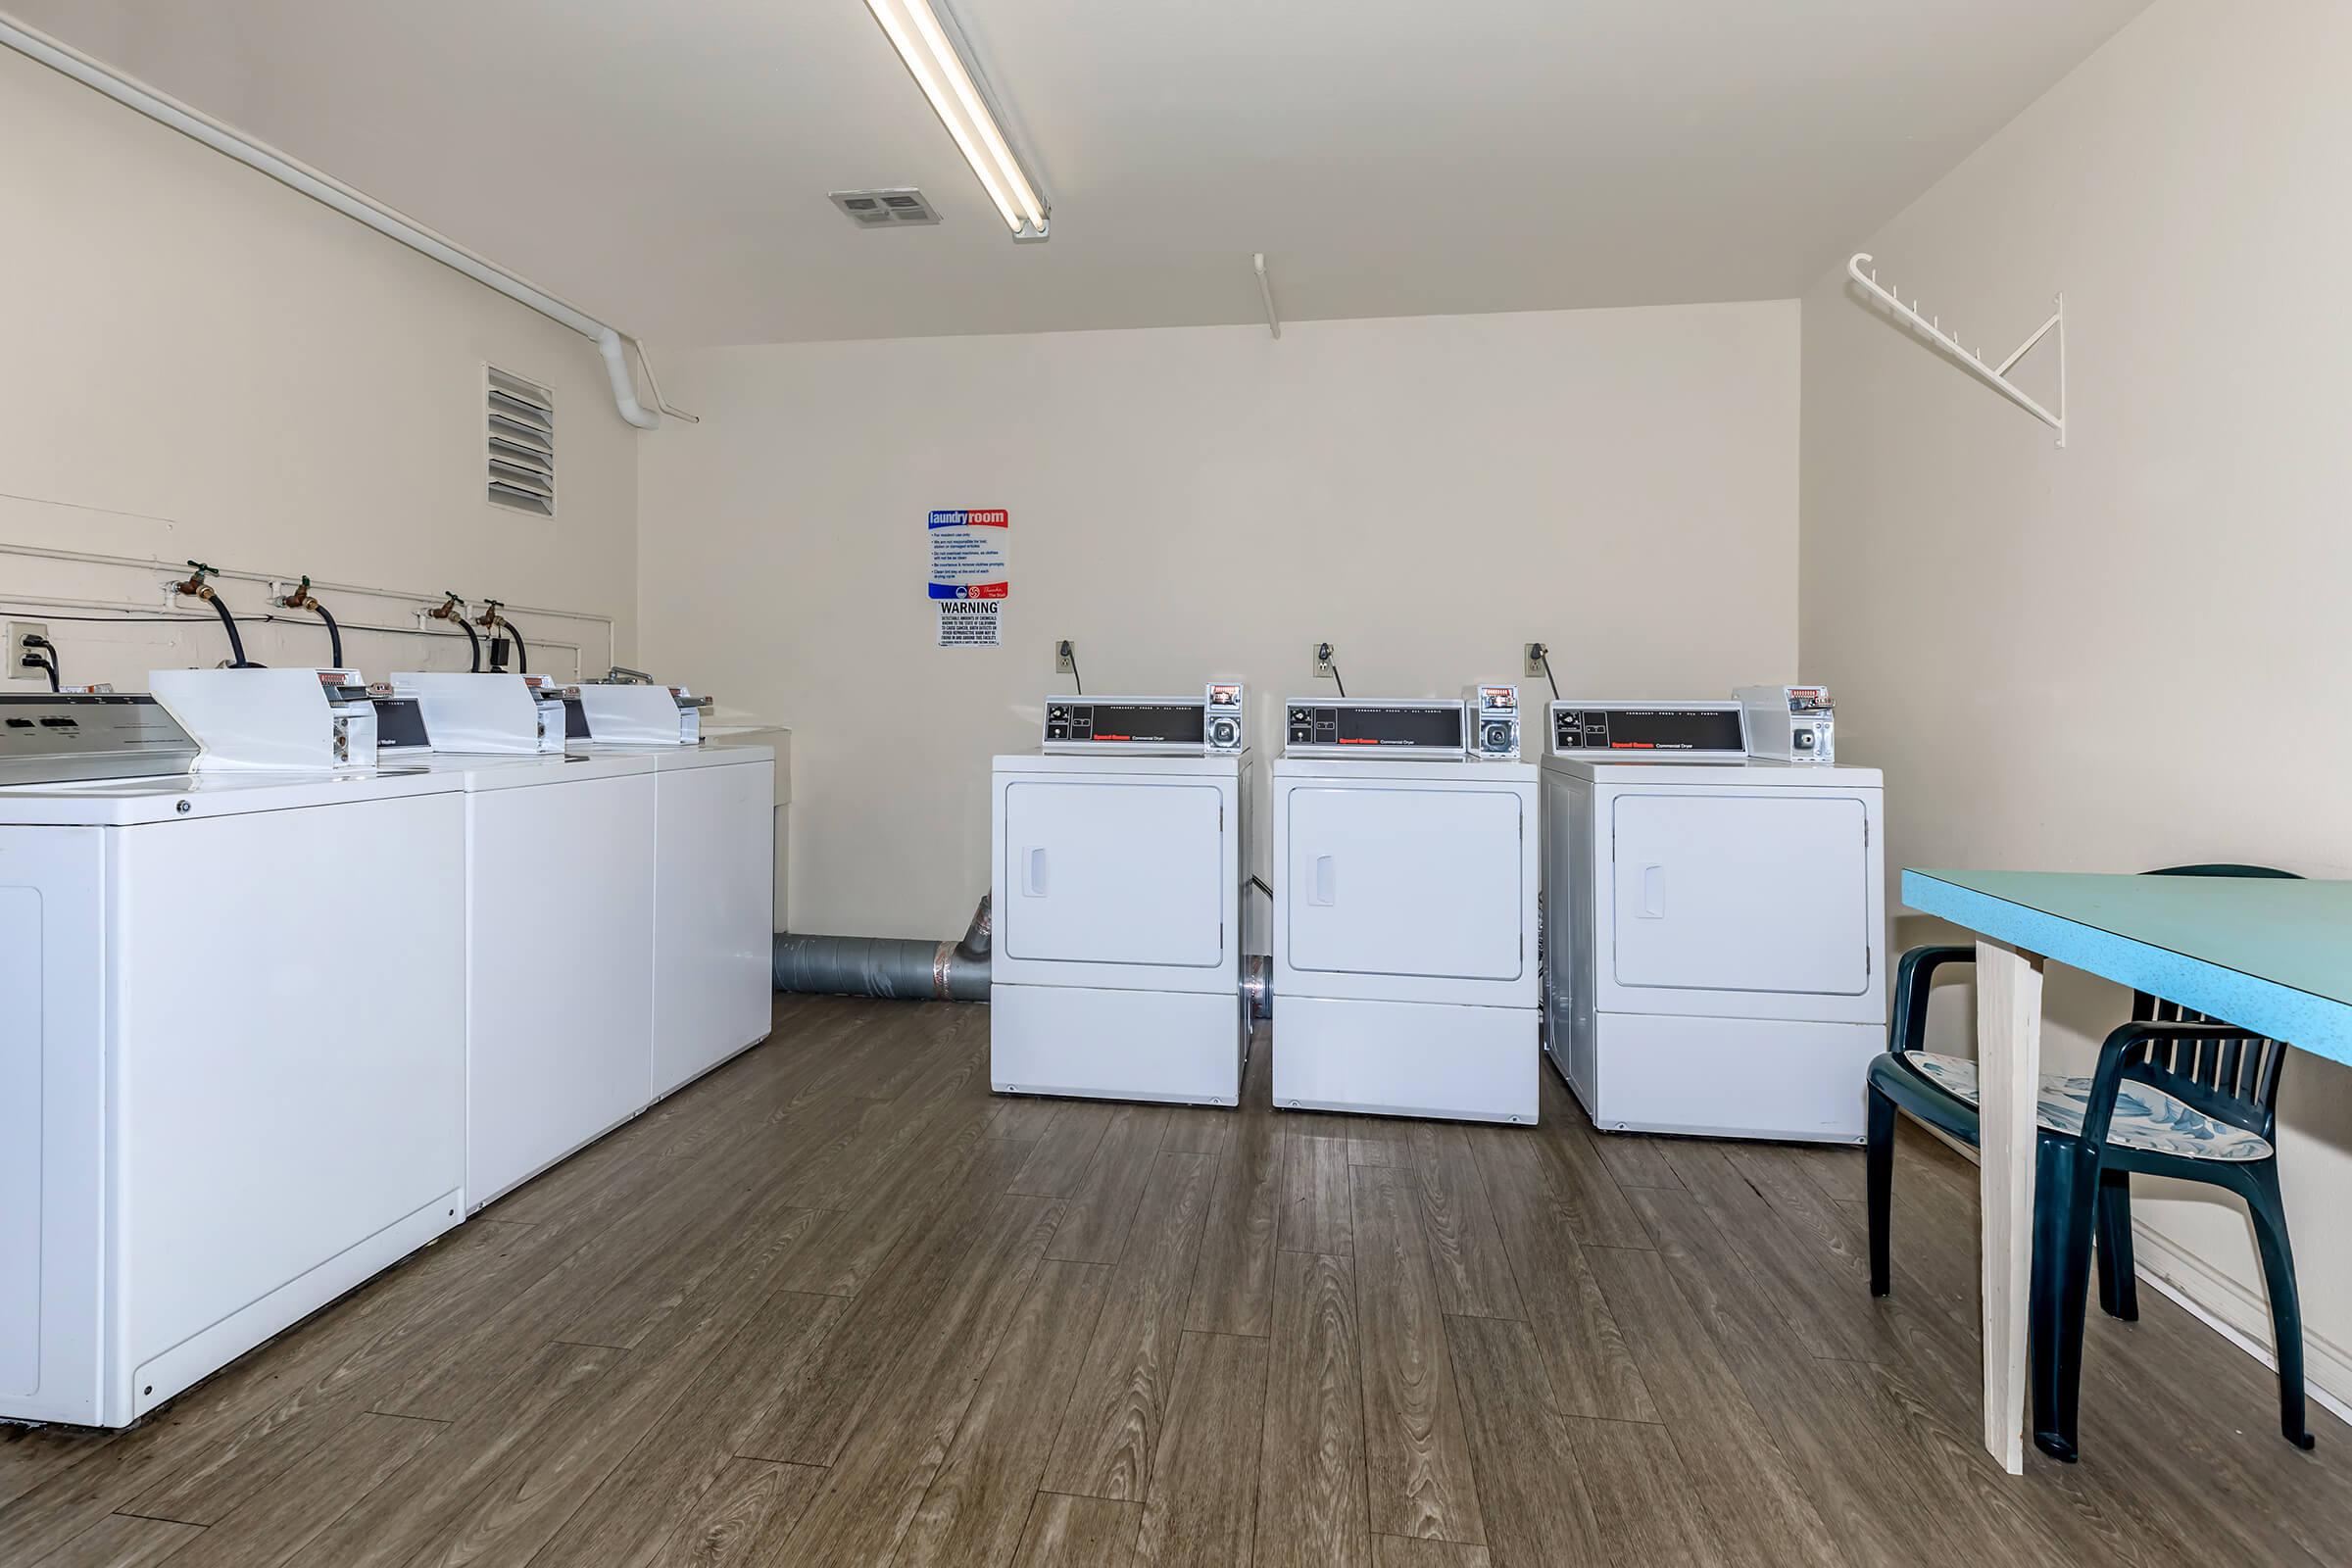 Washer and dryers in the community laundry room